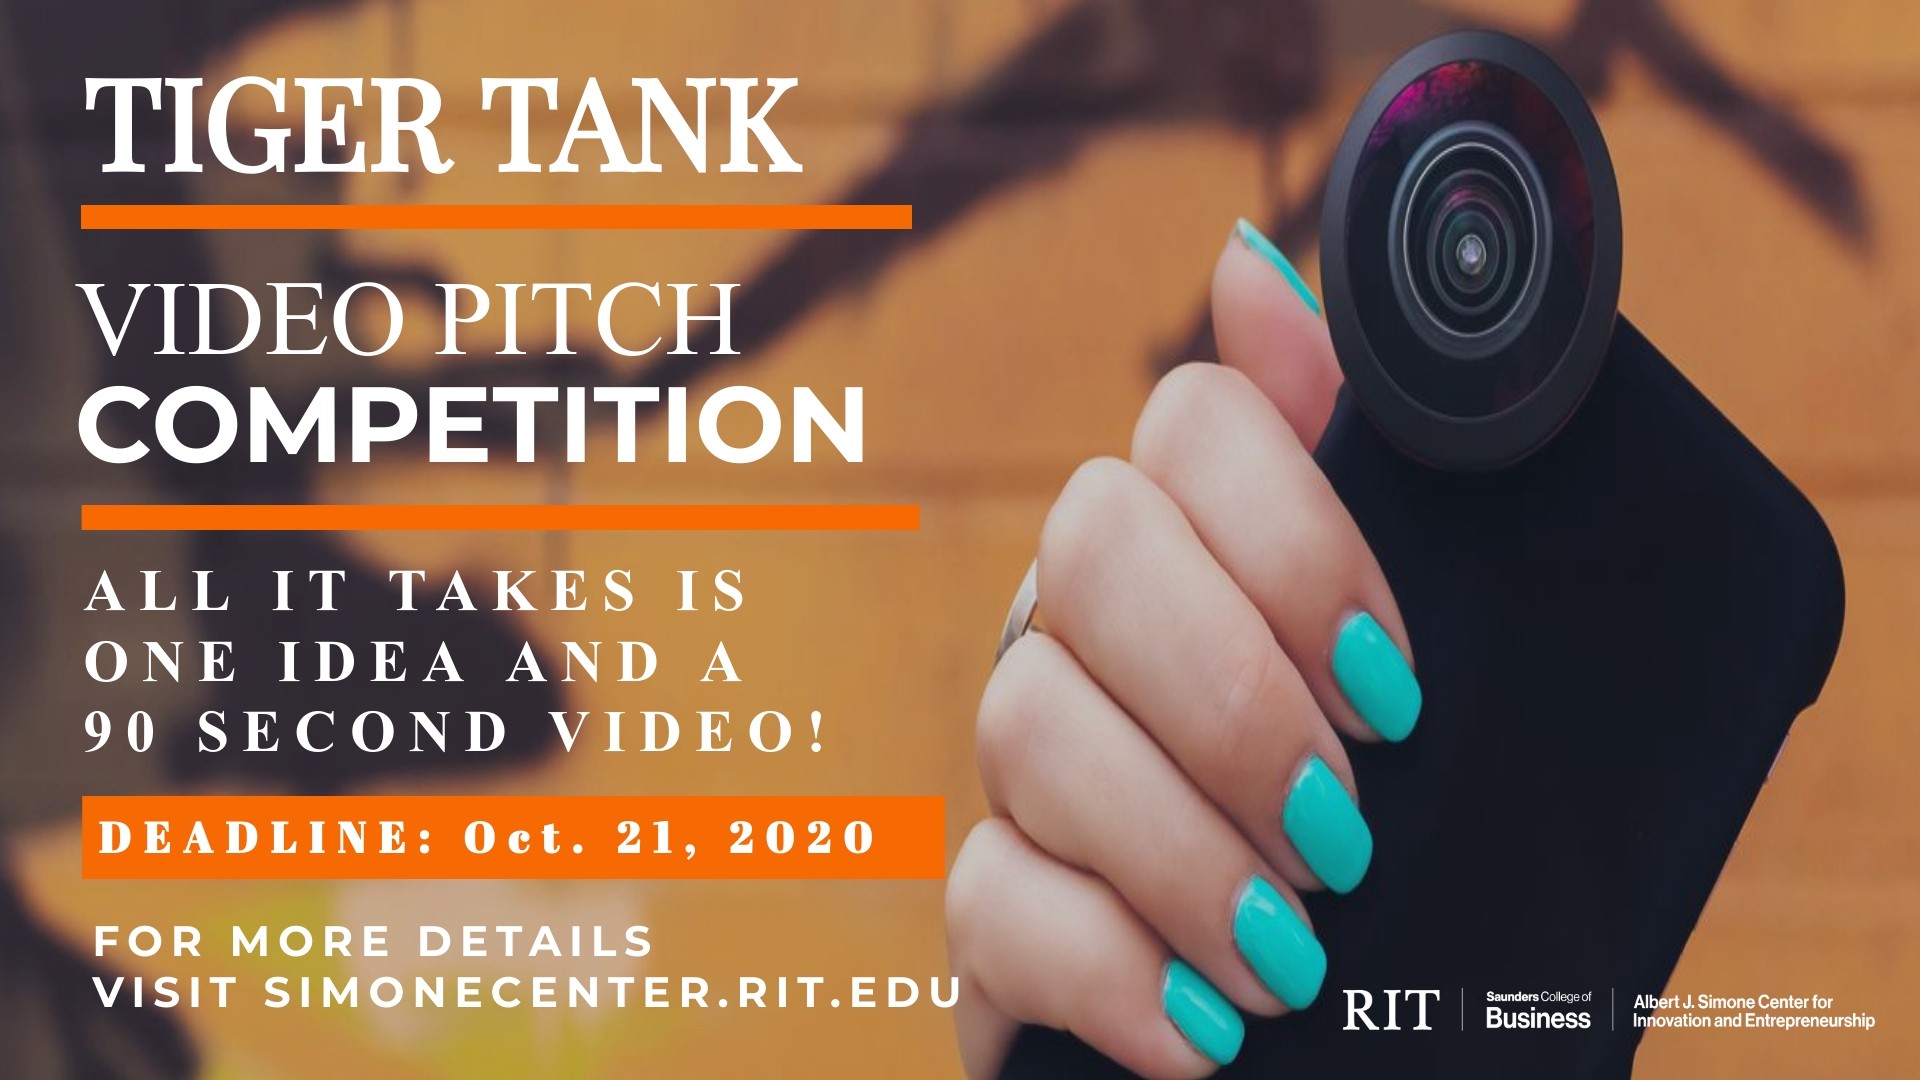 Tiger Tank Video Pitch Competition - EXTENDED Deadline to submit is October 22, 2020 at 5:00 PM